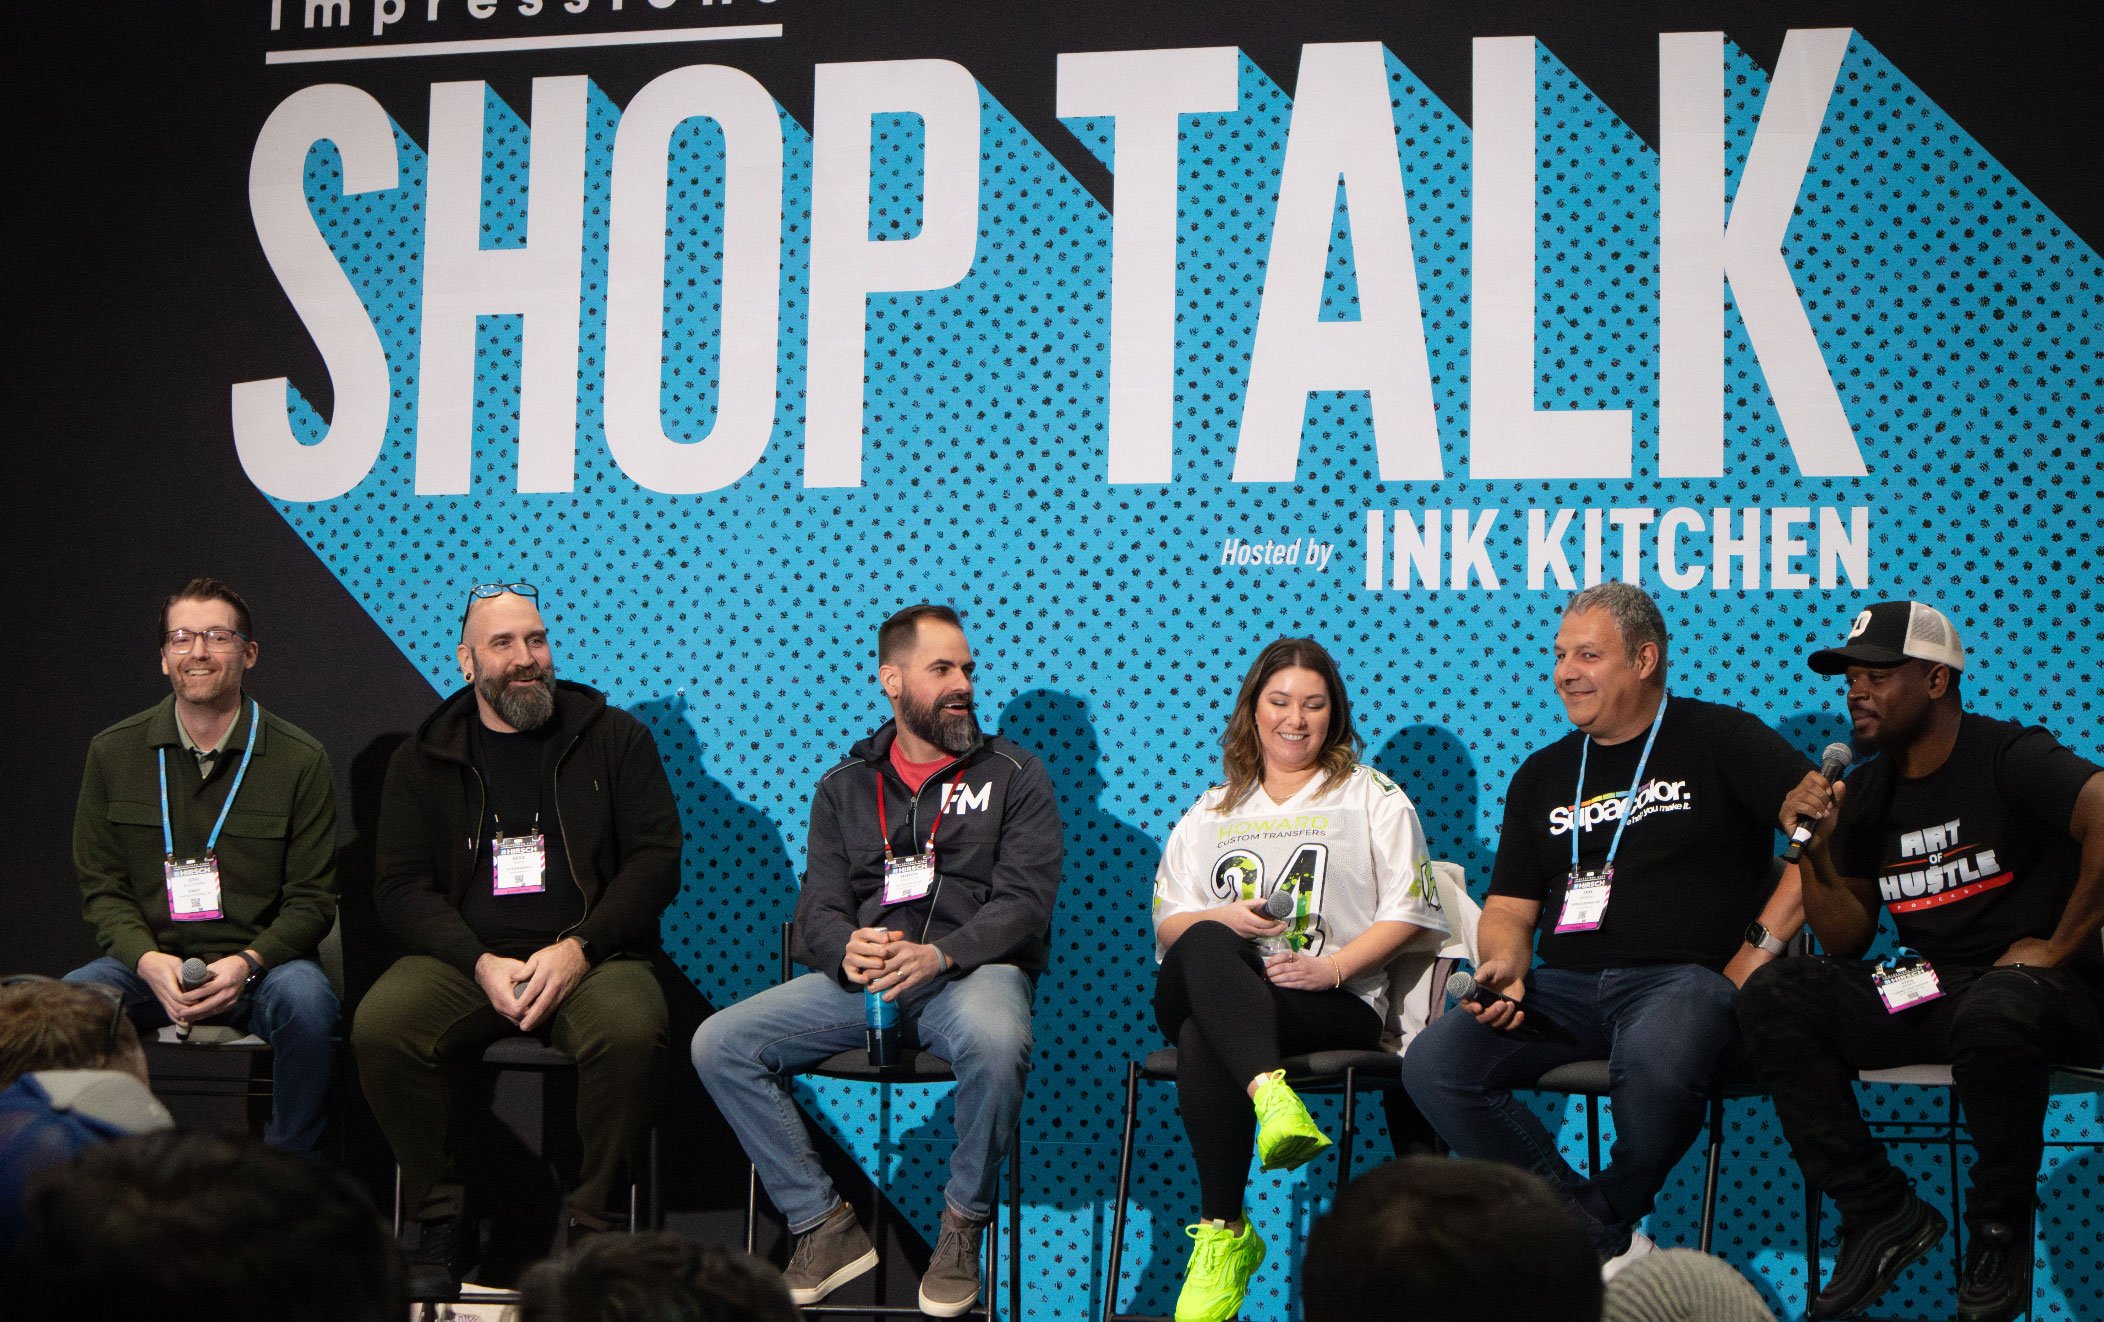  group of people sitting in a row on stage with a "SHOP TALK" sign behind them